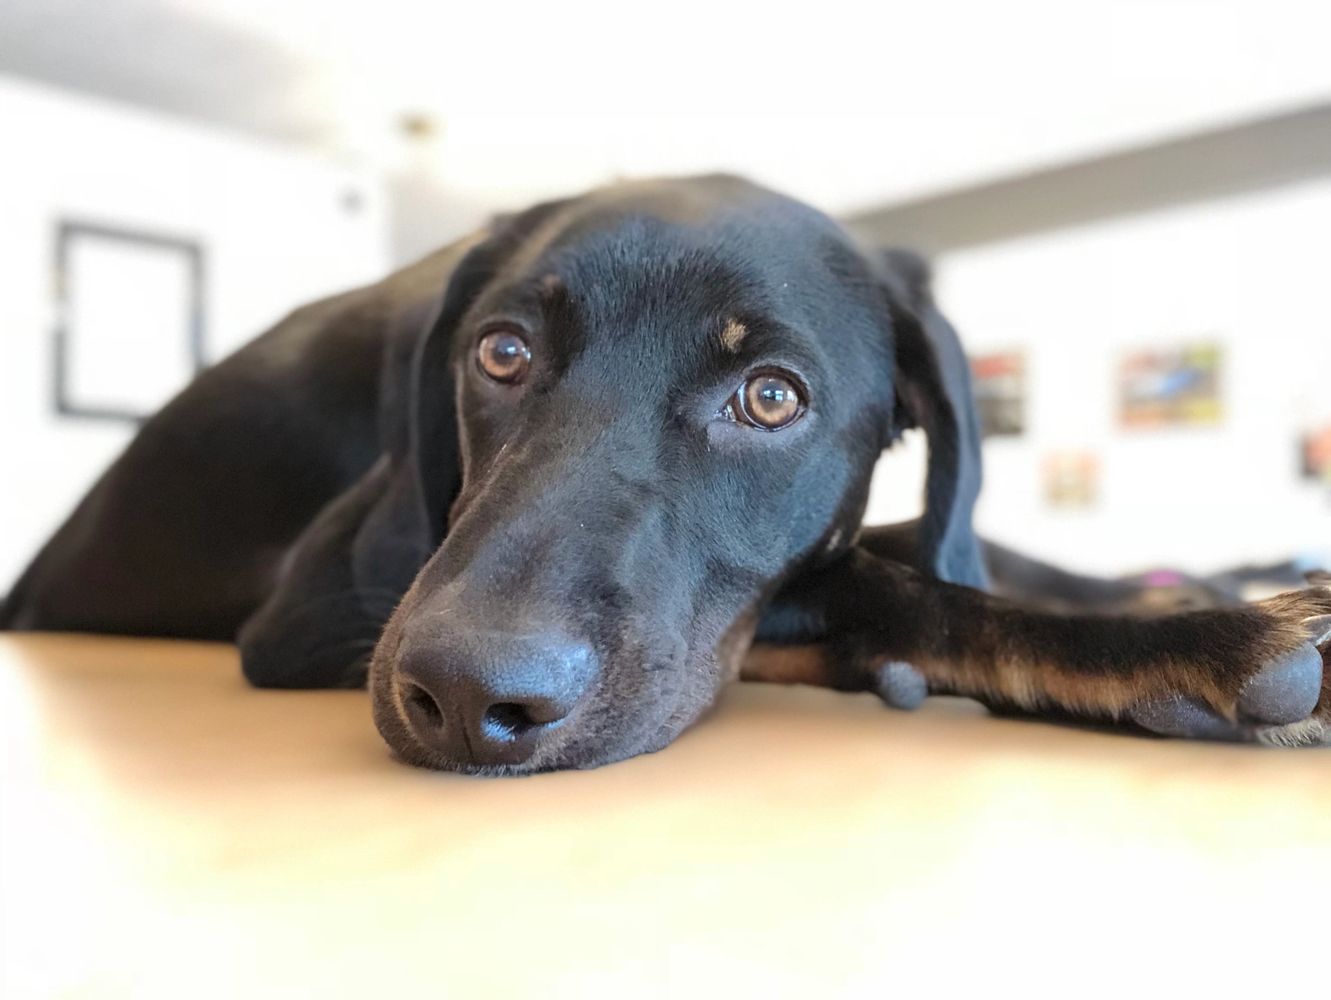 Our office dog Apollo exhausted after a long hard day of work.